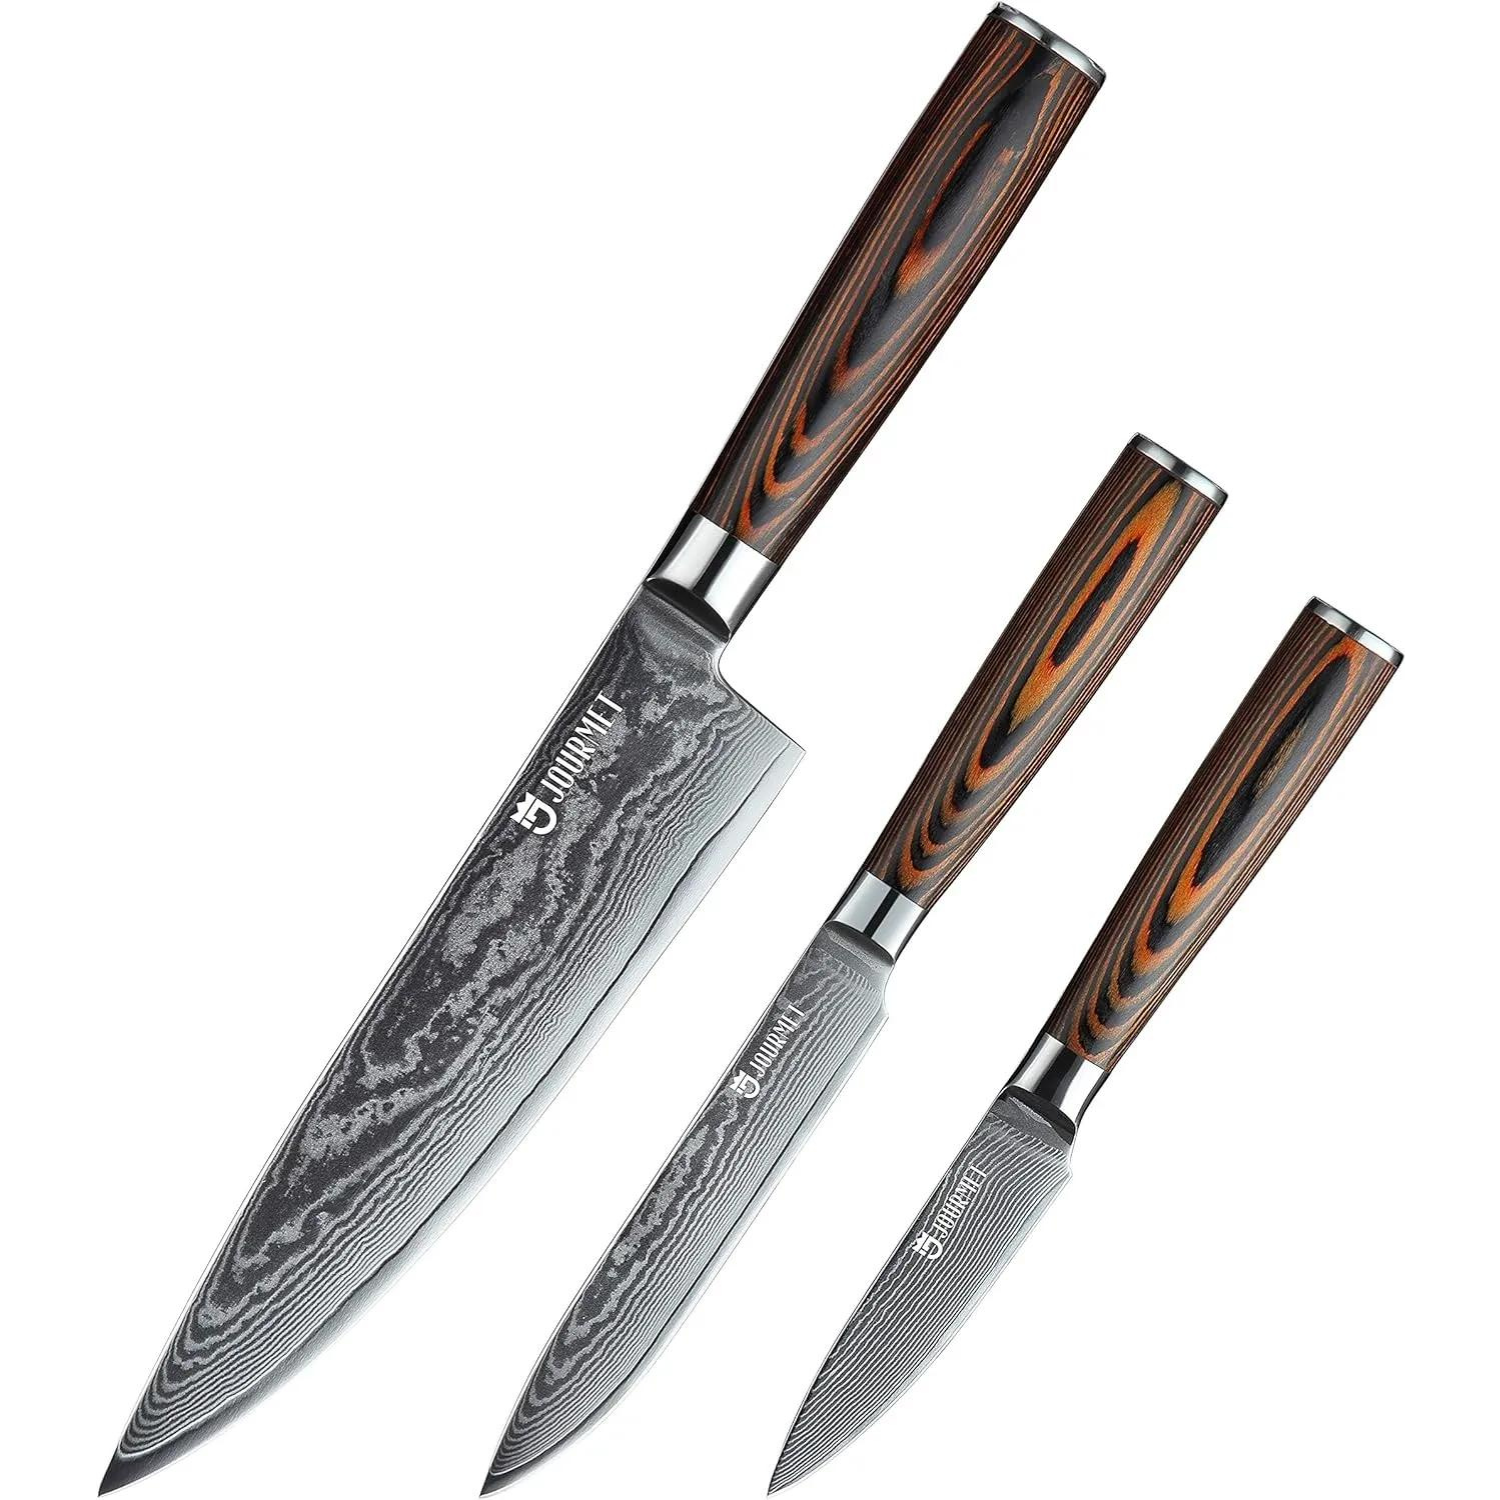 Jourmet 3-Piece Damascus Knife Set displayed on a white background, showcasing the complete set with 8-inch Chef Knife, 5-inch Utility Knife, and 3.5-inch Paring Knife